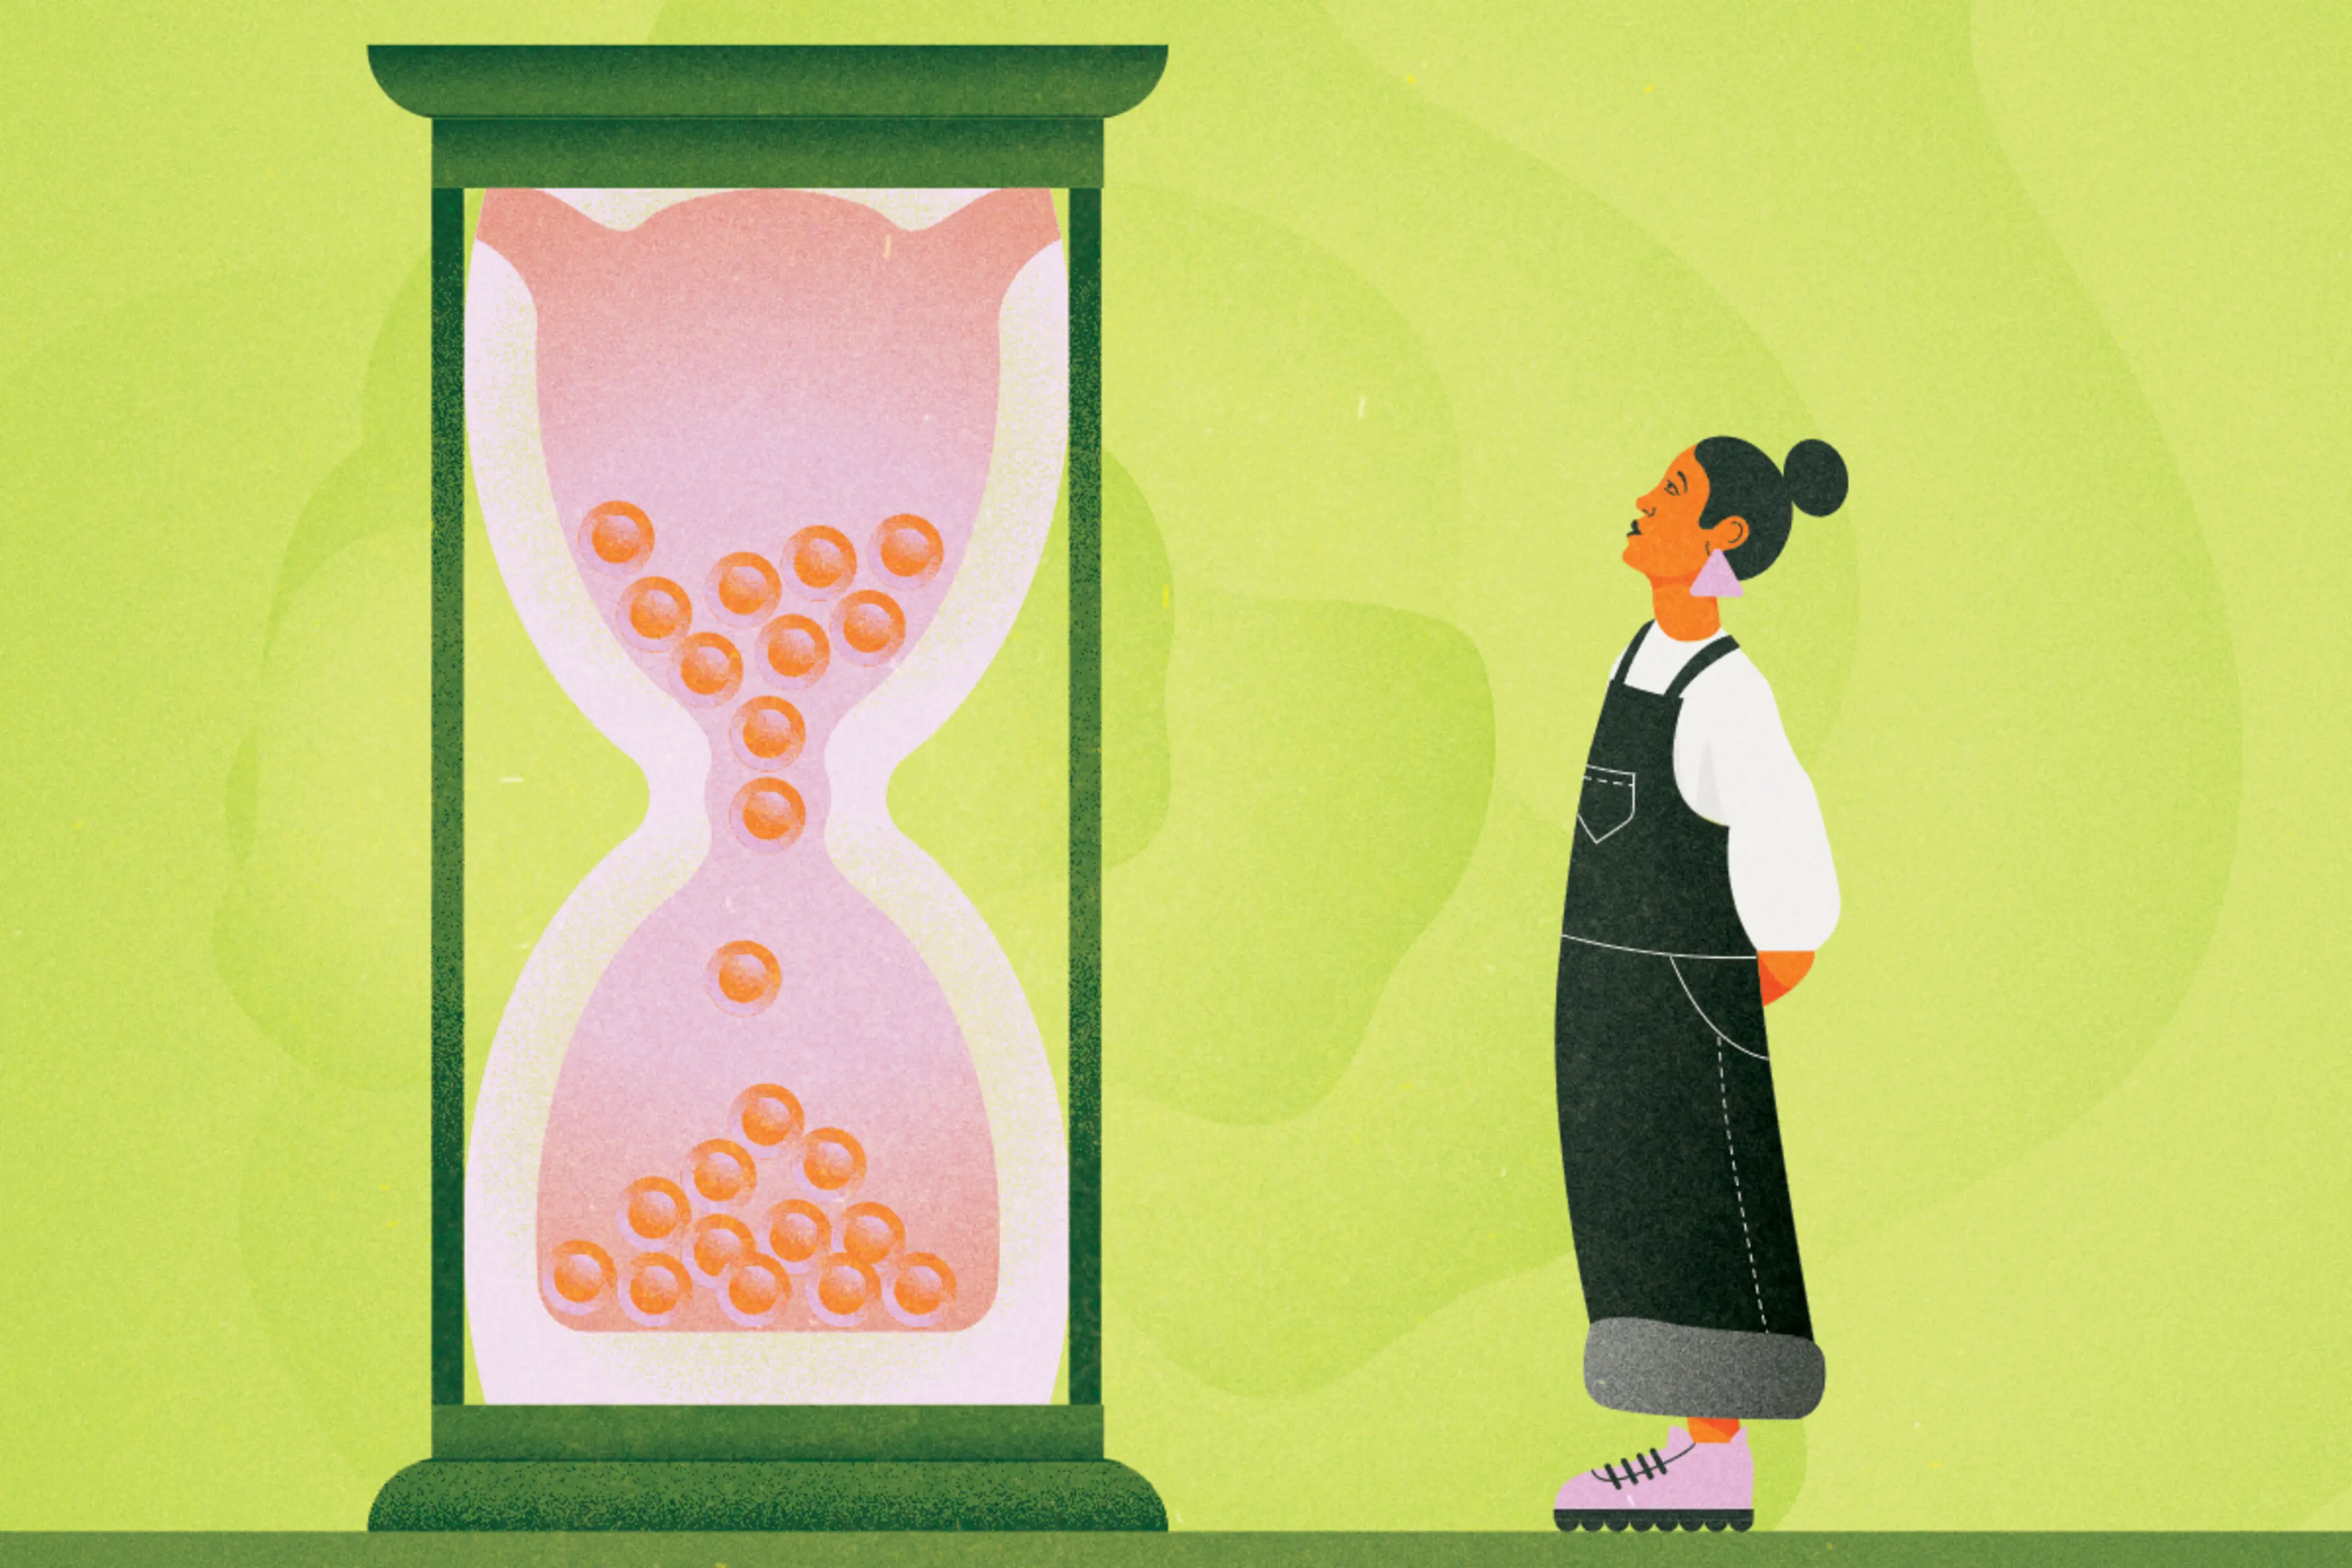 The Definitive Guide to Freezing Your Eggs